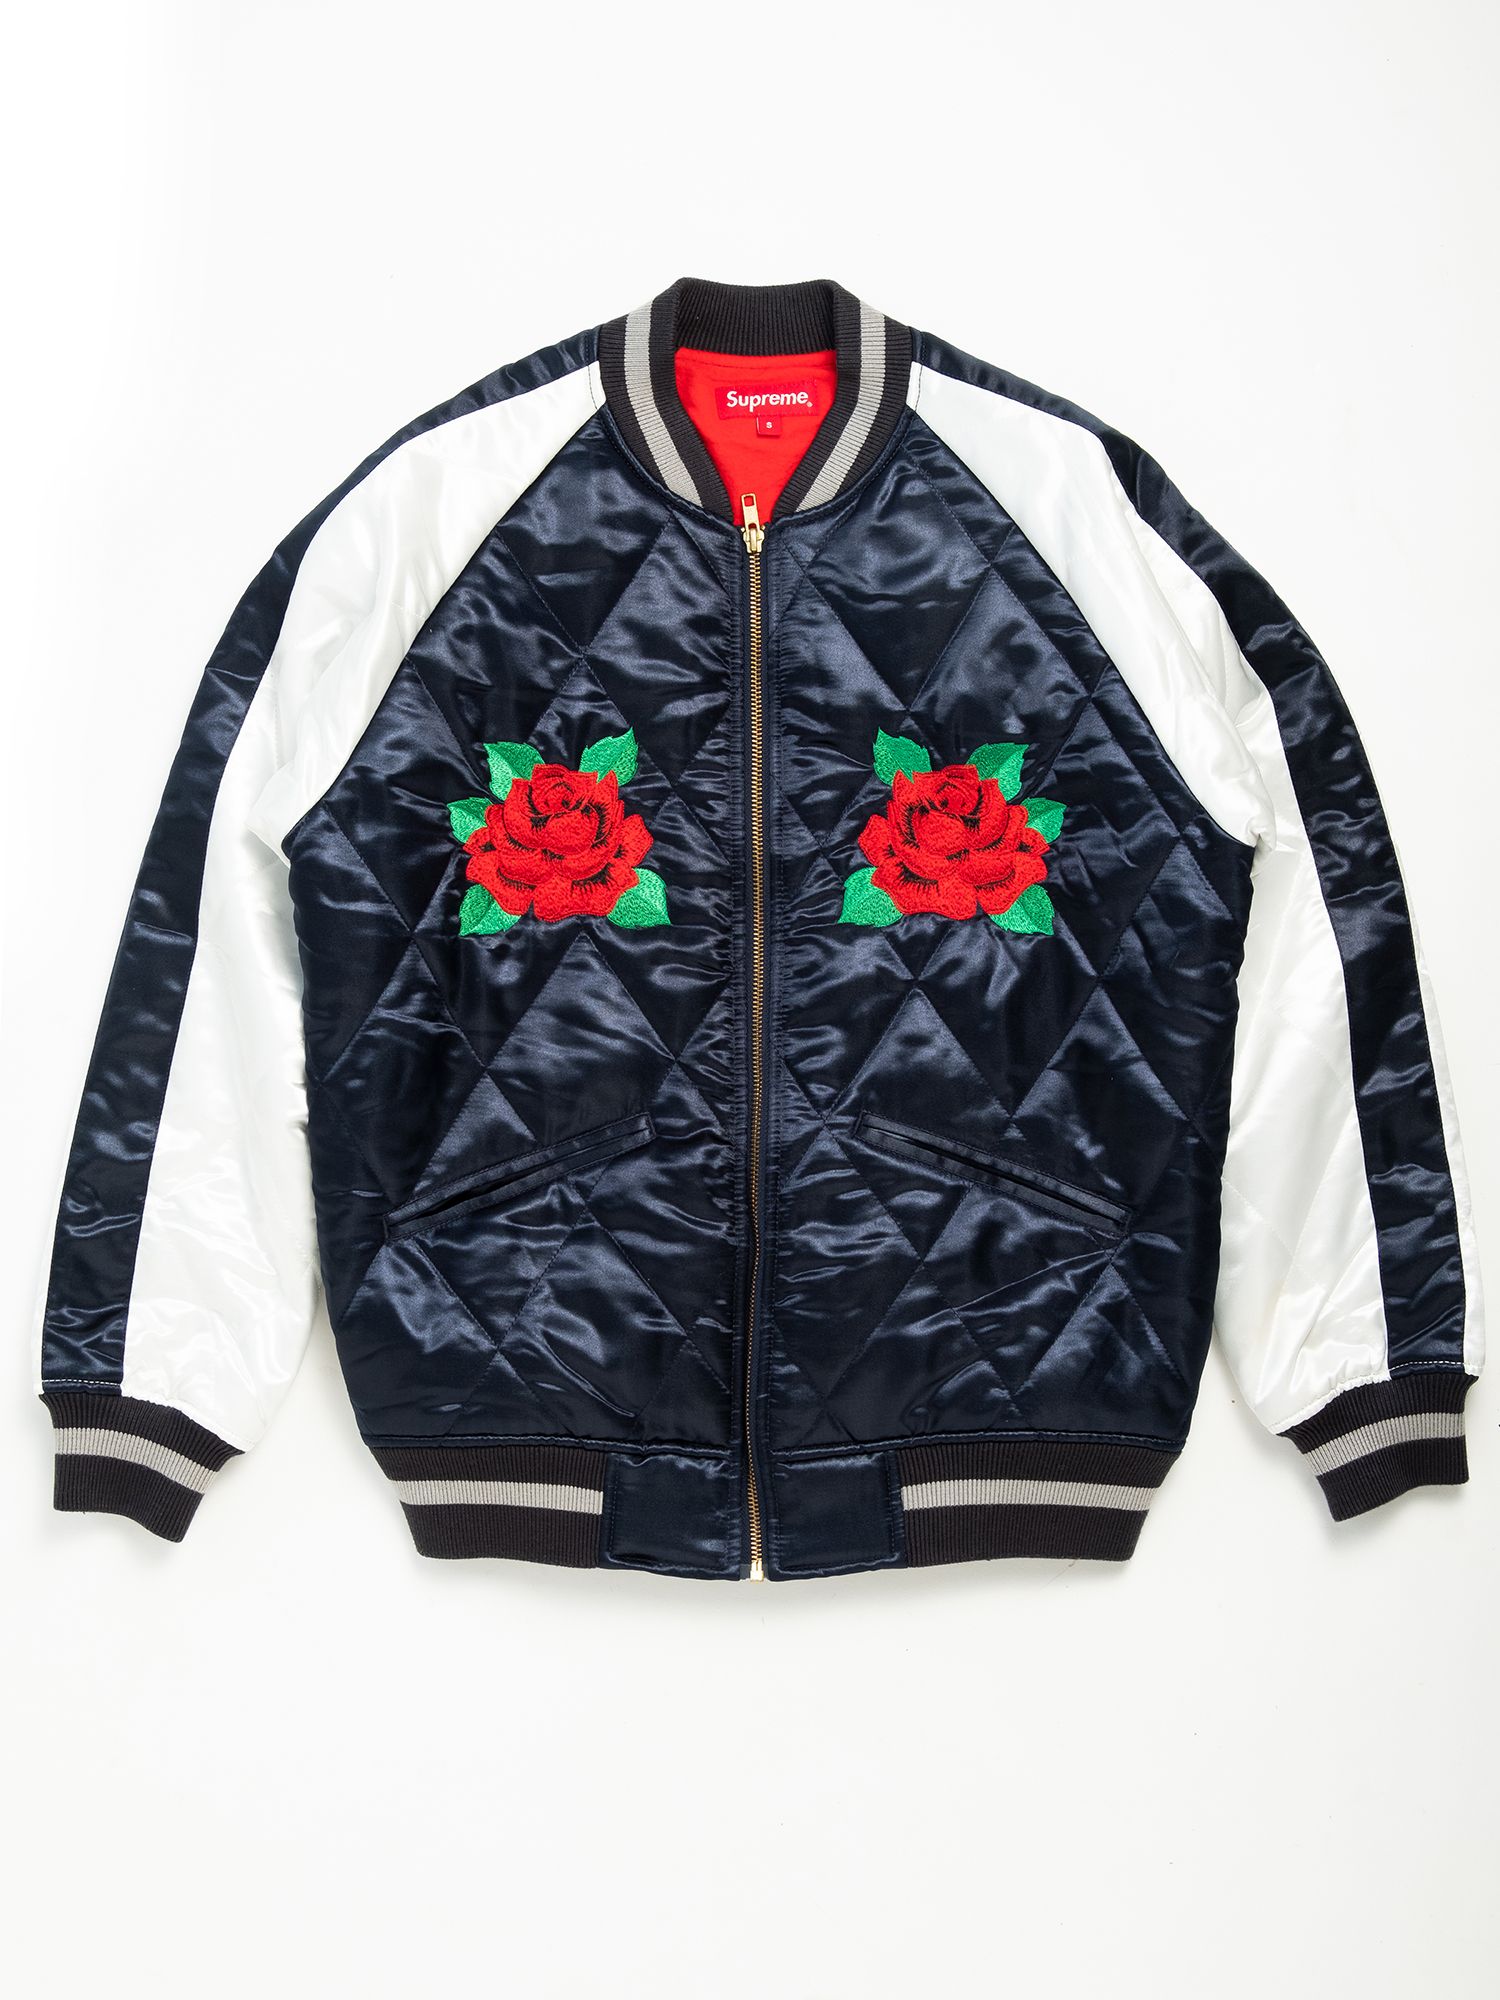 Supreme SUPREME rose quilted bomber jacket FW13 | Grailed